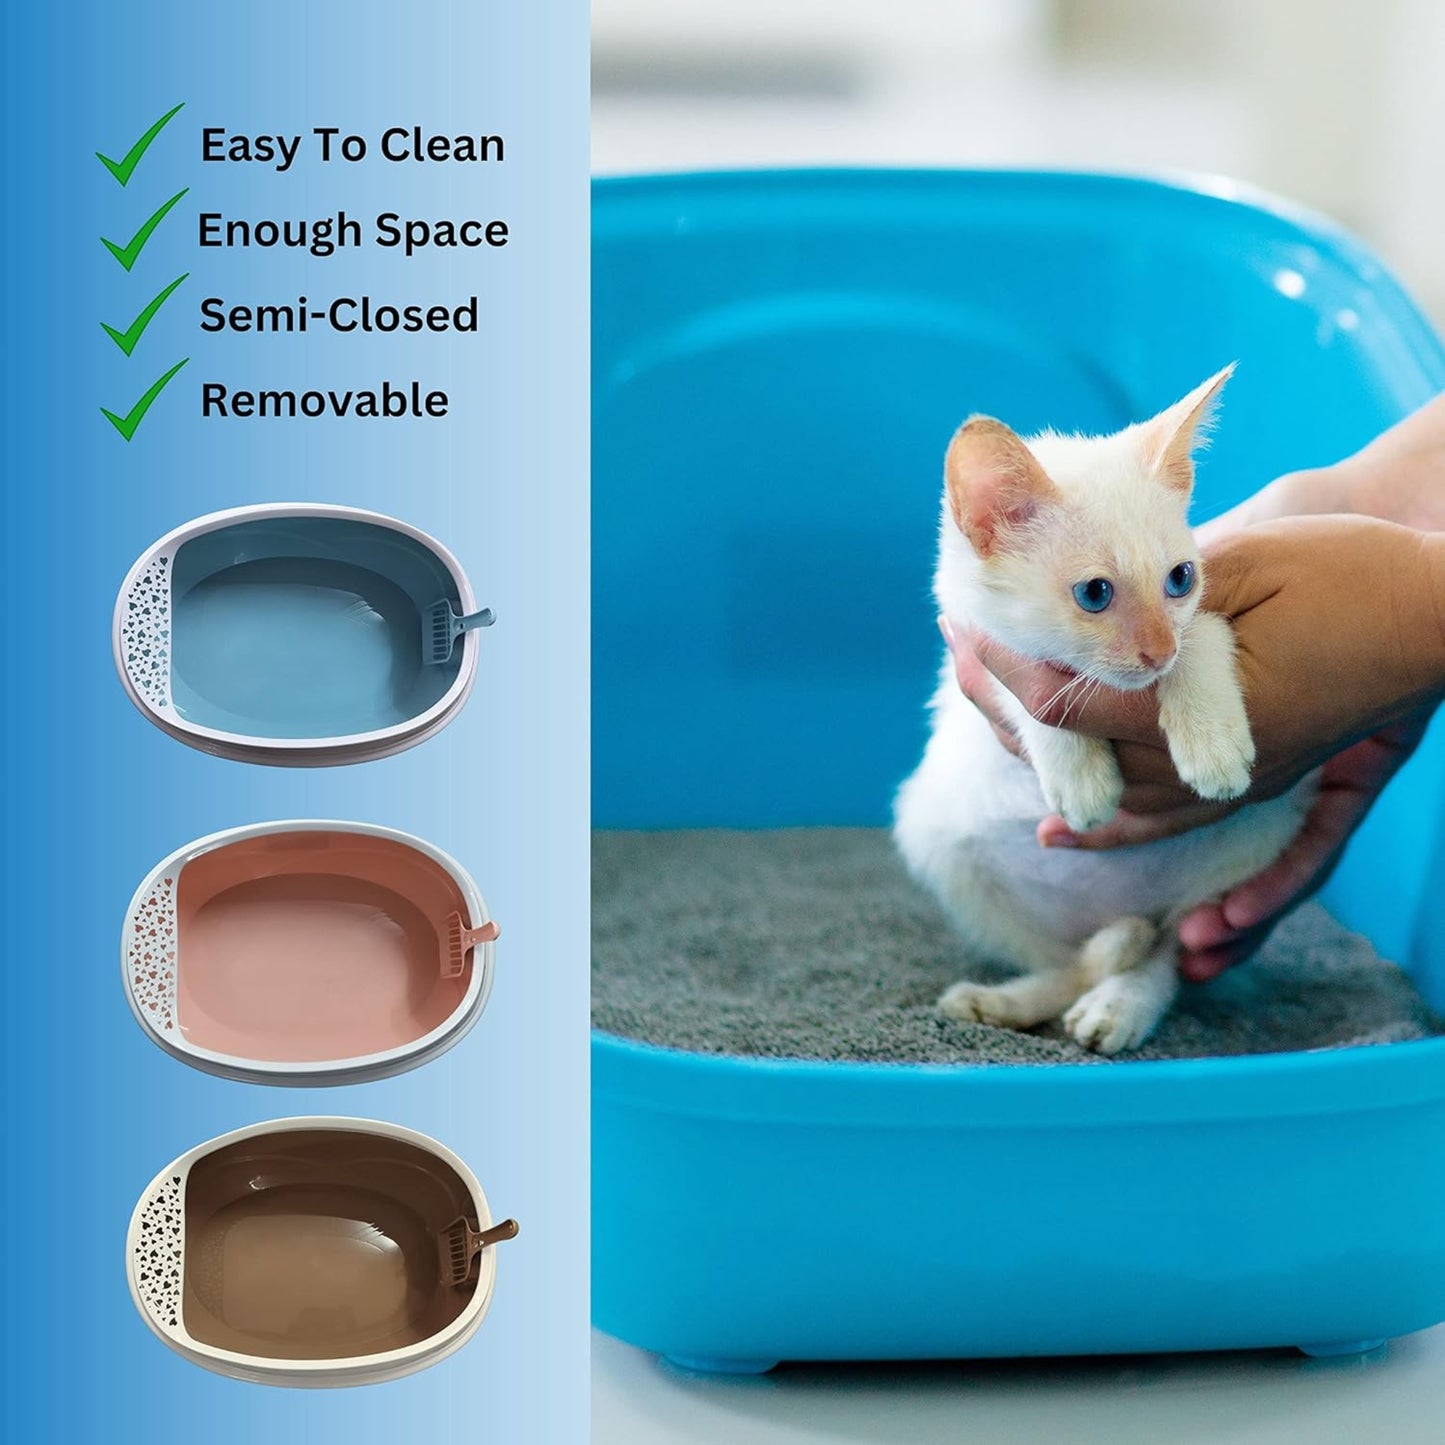 Foodie Puppies Cat Litter Tray Set with Rim & Scooper (Camel Brown)